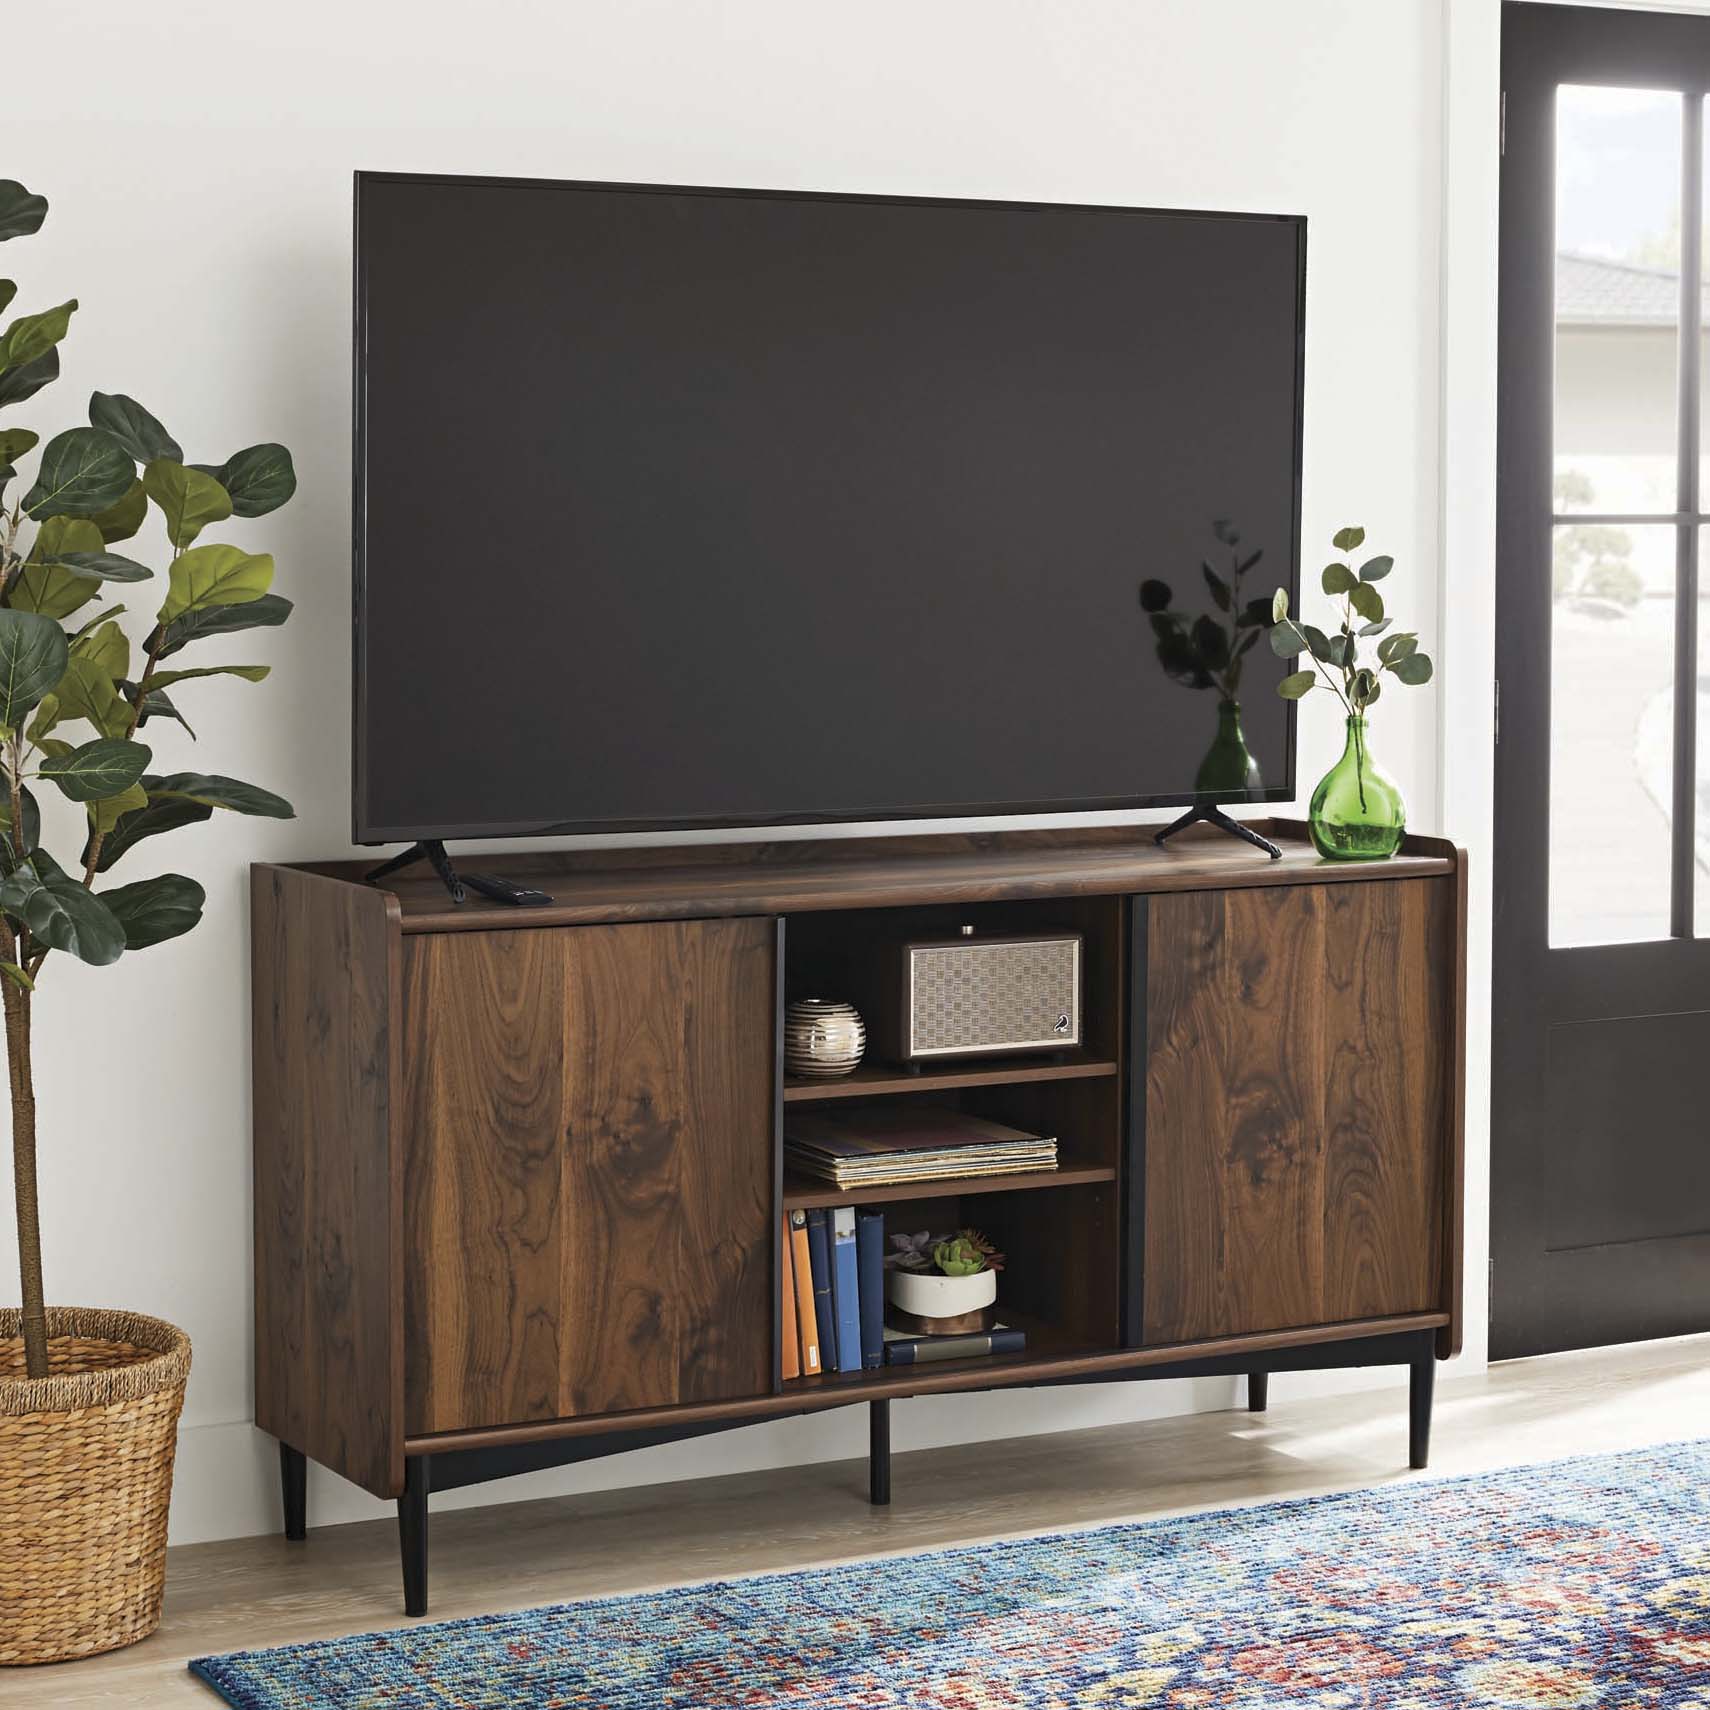 Better Homes & Gardens Montclair TV Stand Storage Console for TVs up to 65", Vintage Walnut Finish - image 1 of 7